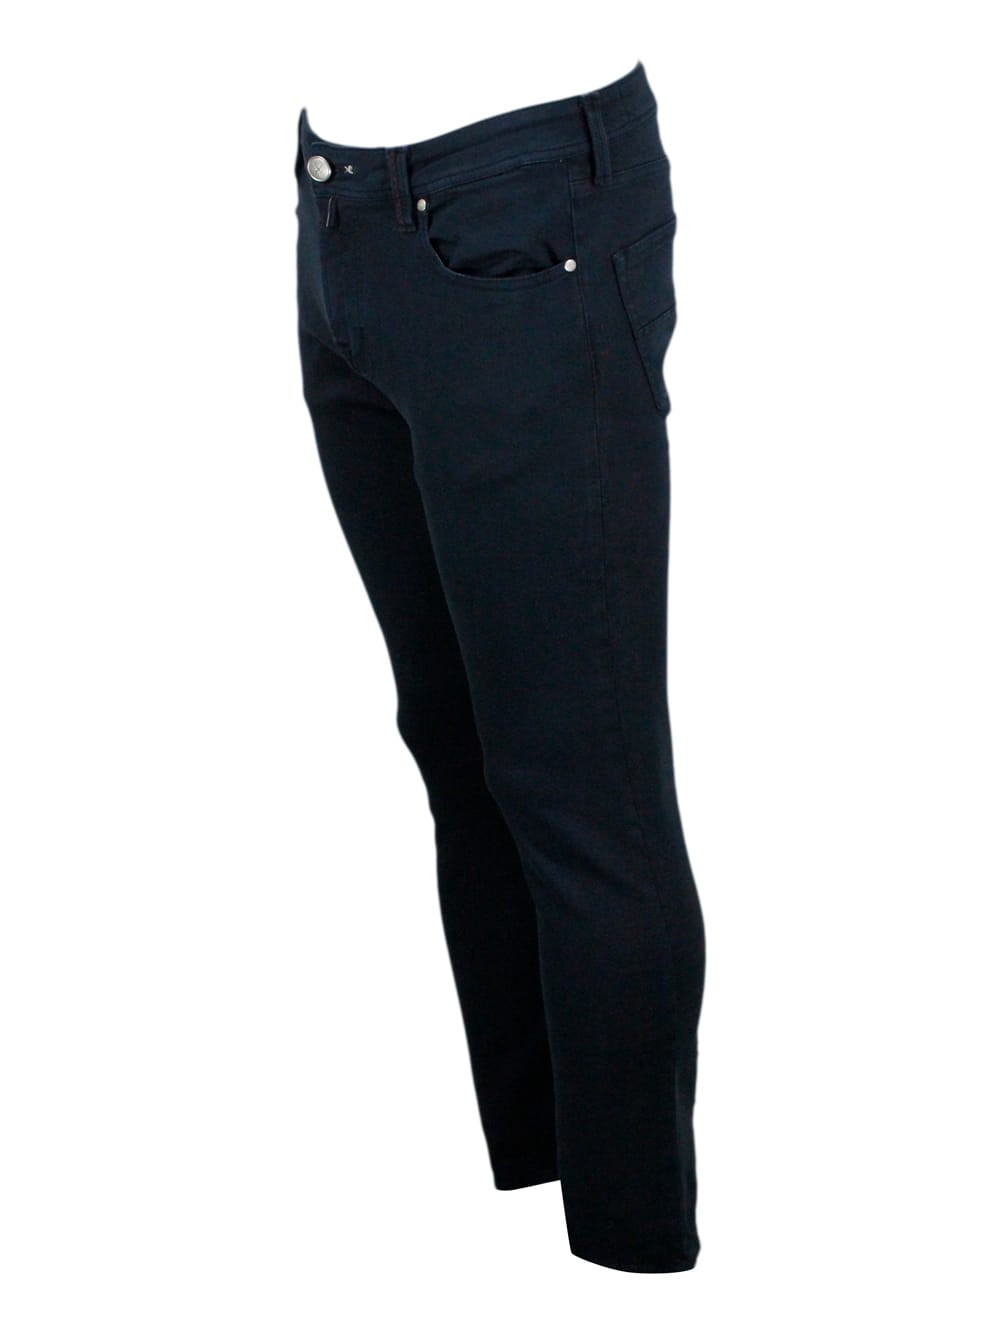 Shop Sartoria Tramarossa Leonardo Zip Trousers In Super Stretch Cotton With 5 Pockets With Tone-on-tone Tailored Stitching An In Black